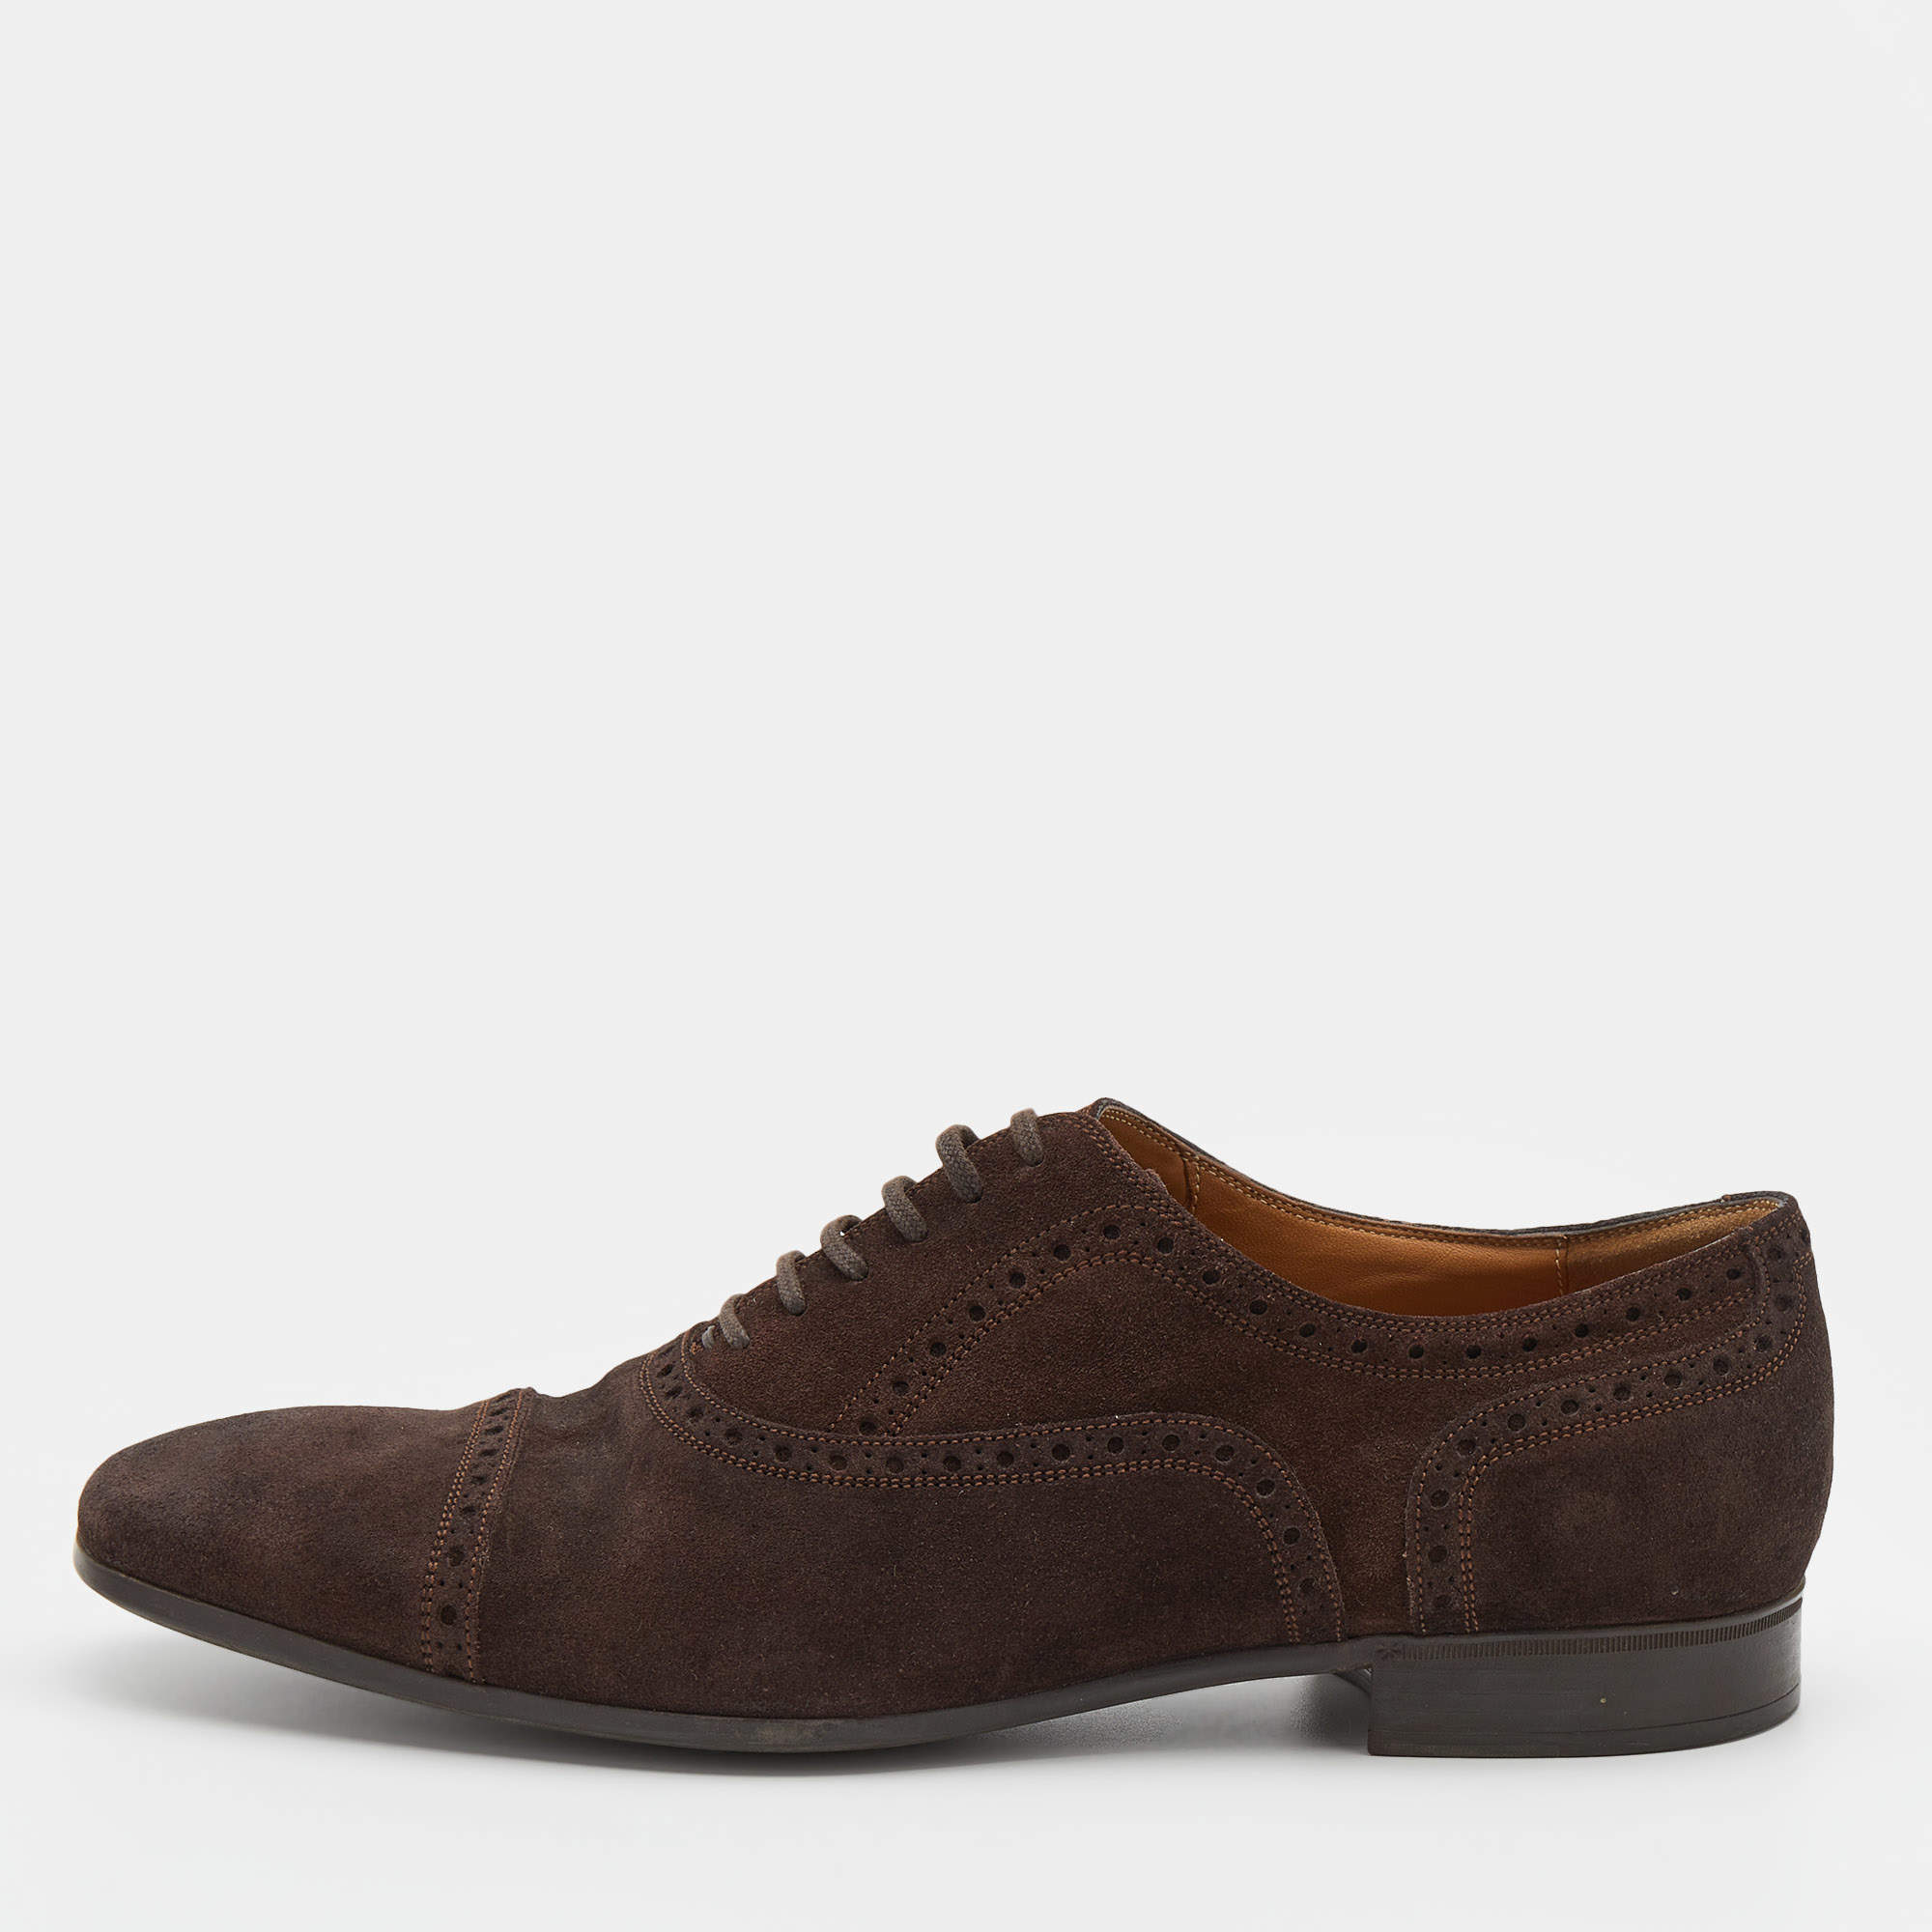 Gucci Brown Brogue Suede Lace Up Oxford Size 43.5